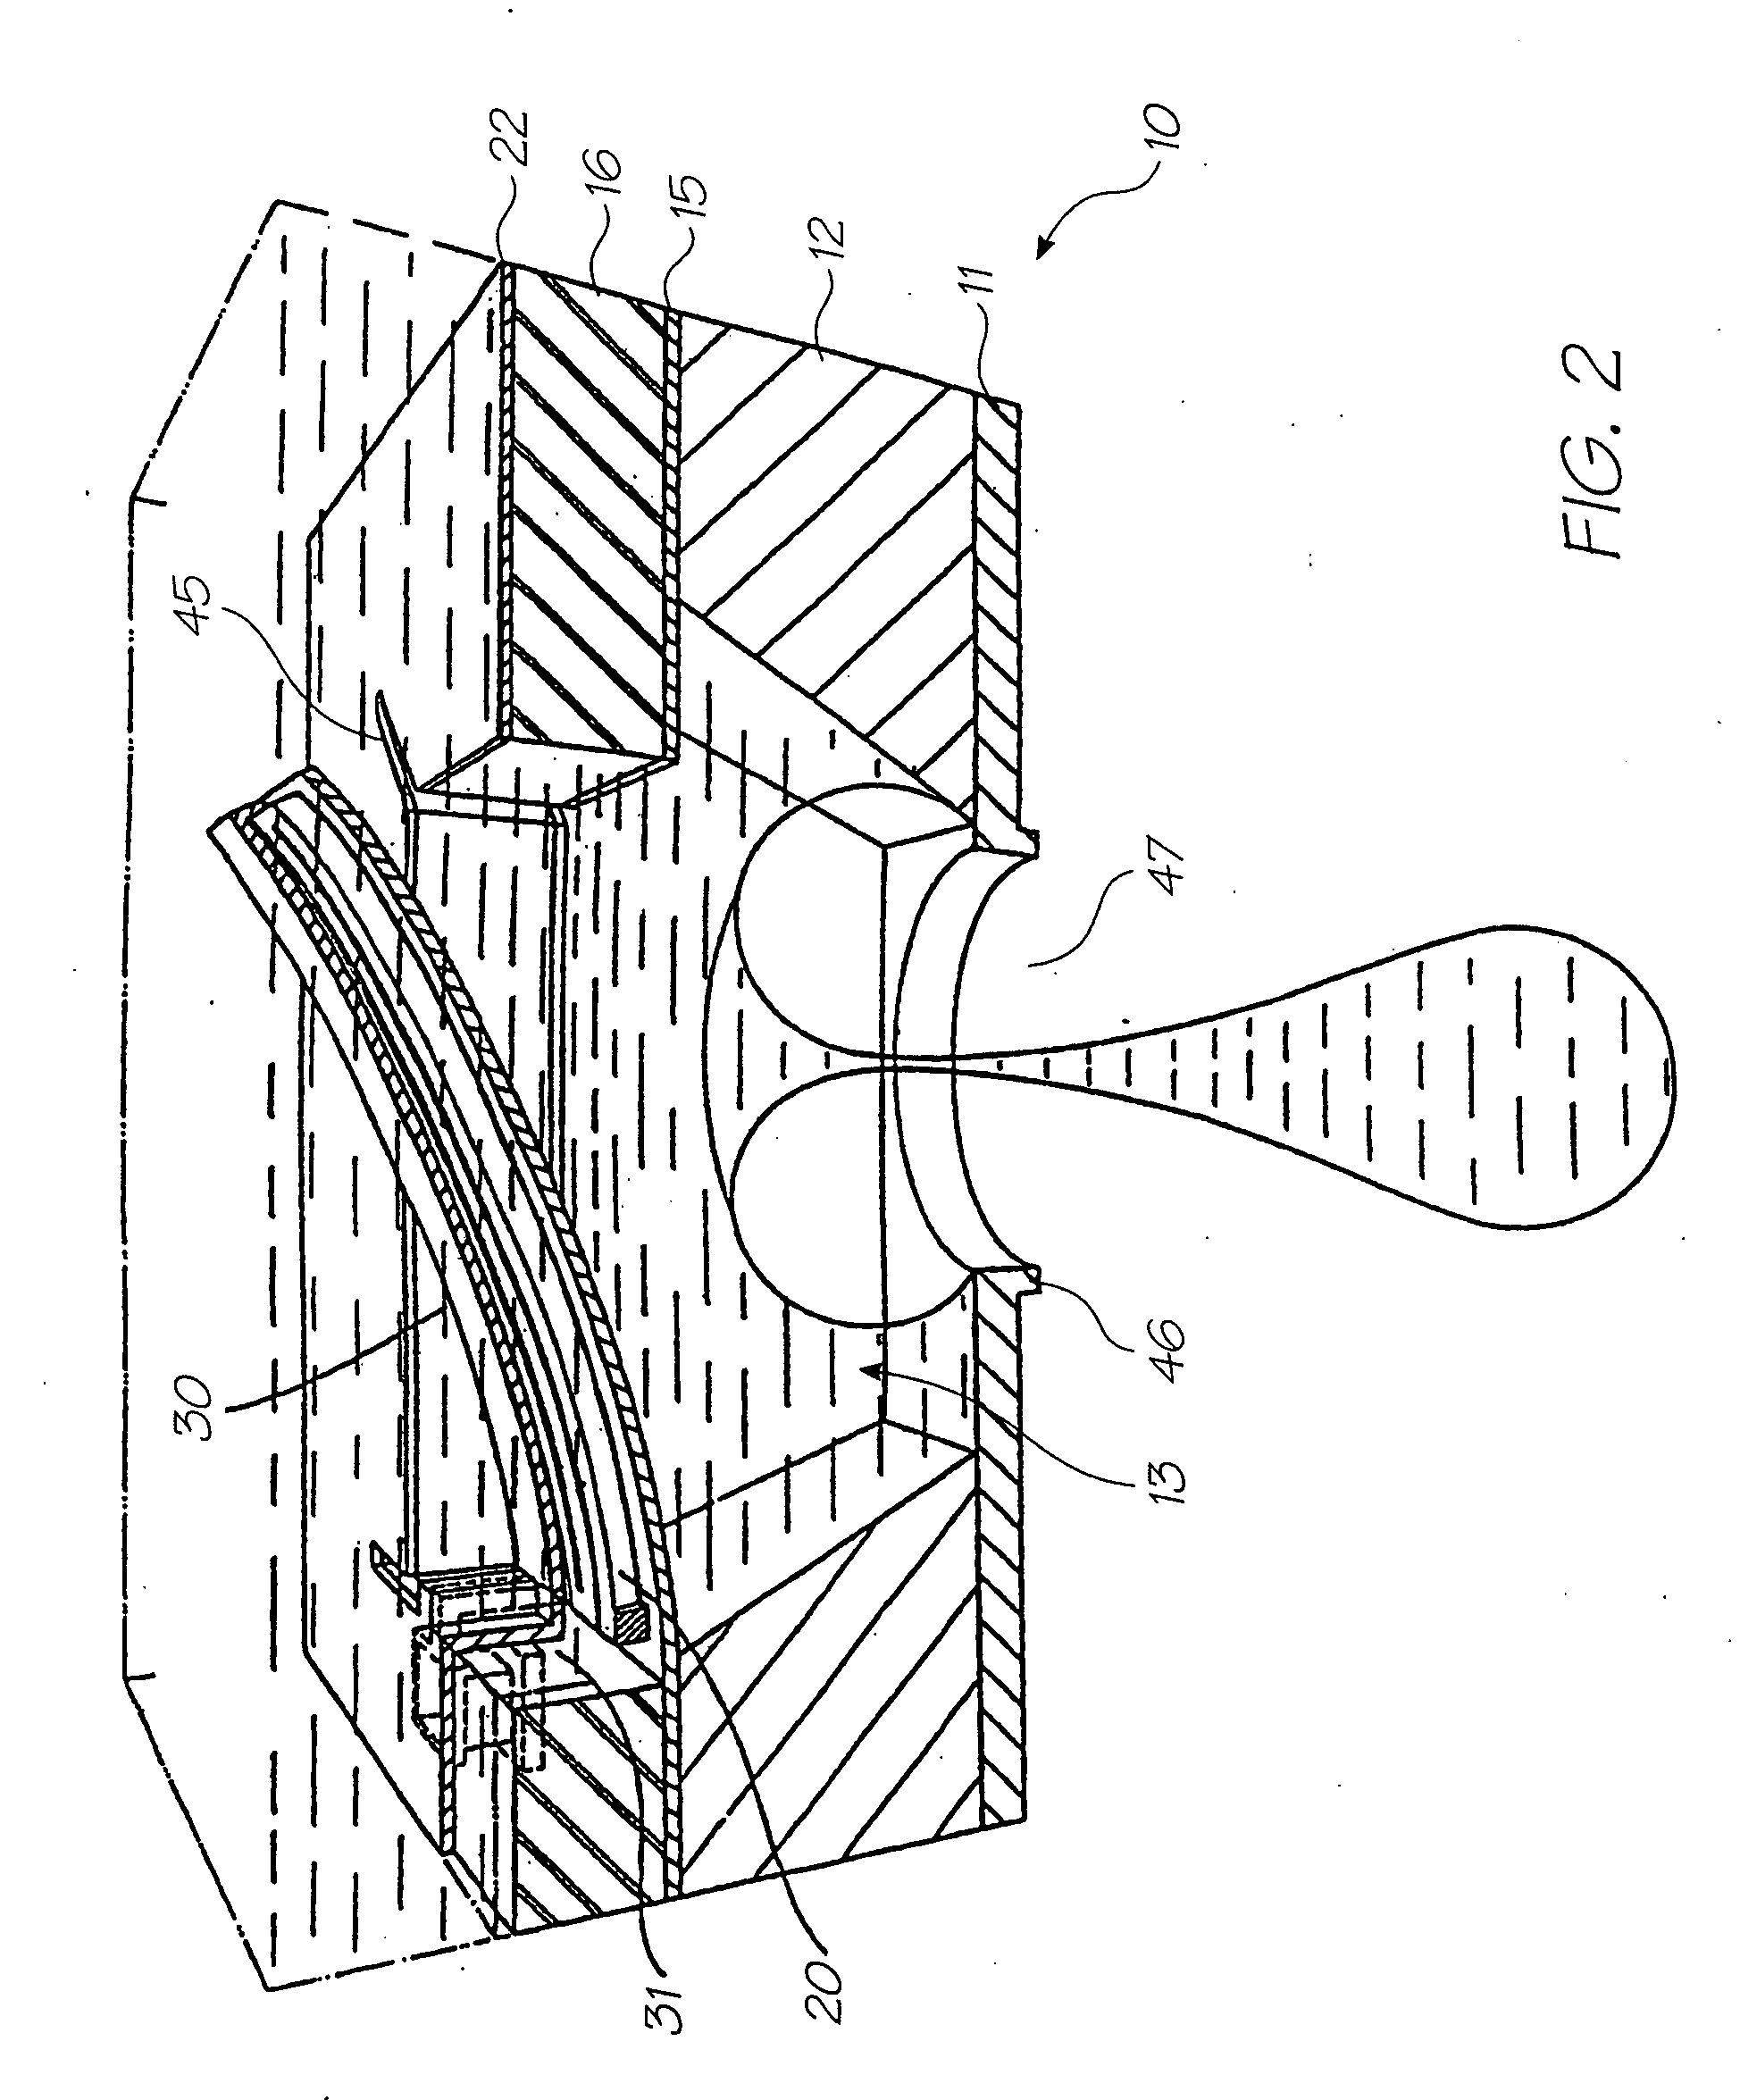 Printhead integrated circuit with large array of droplet ejectors